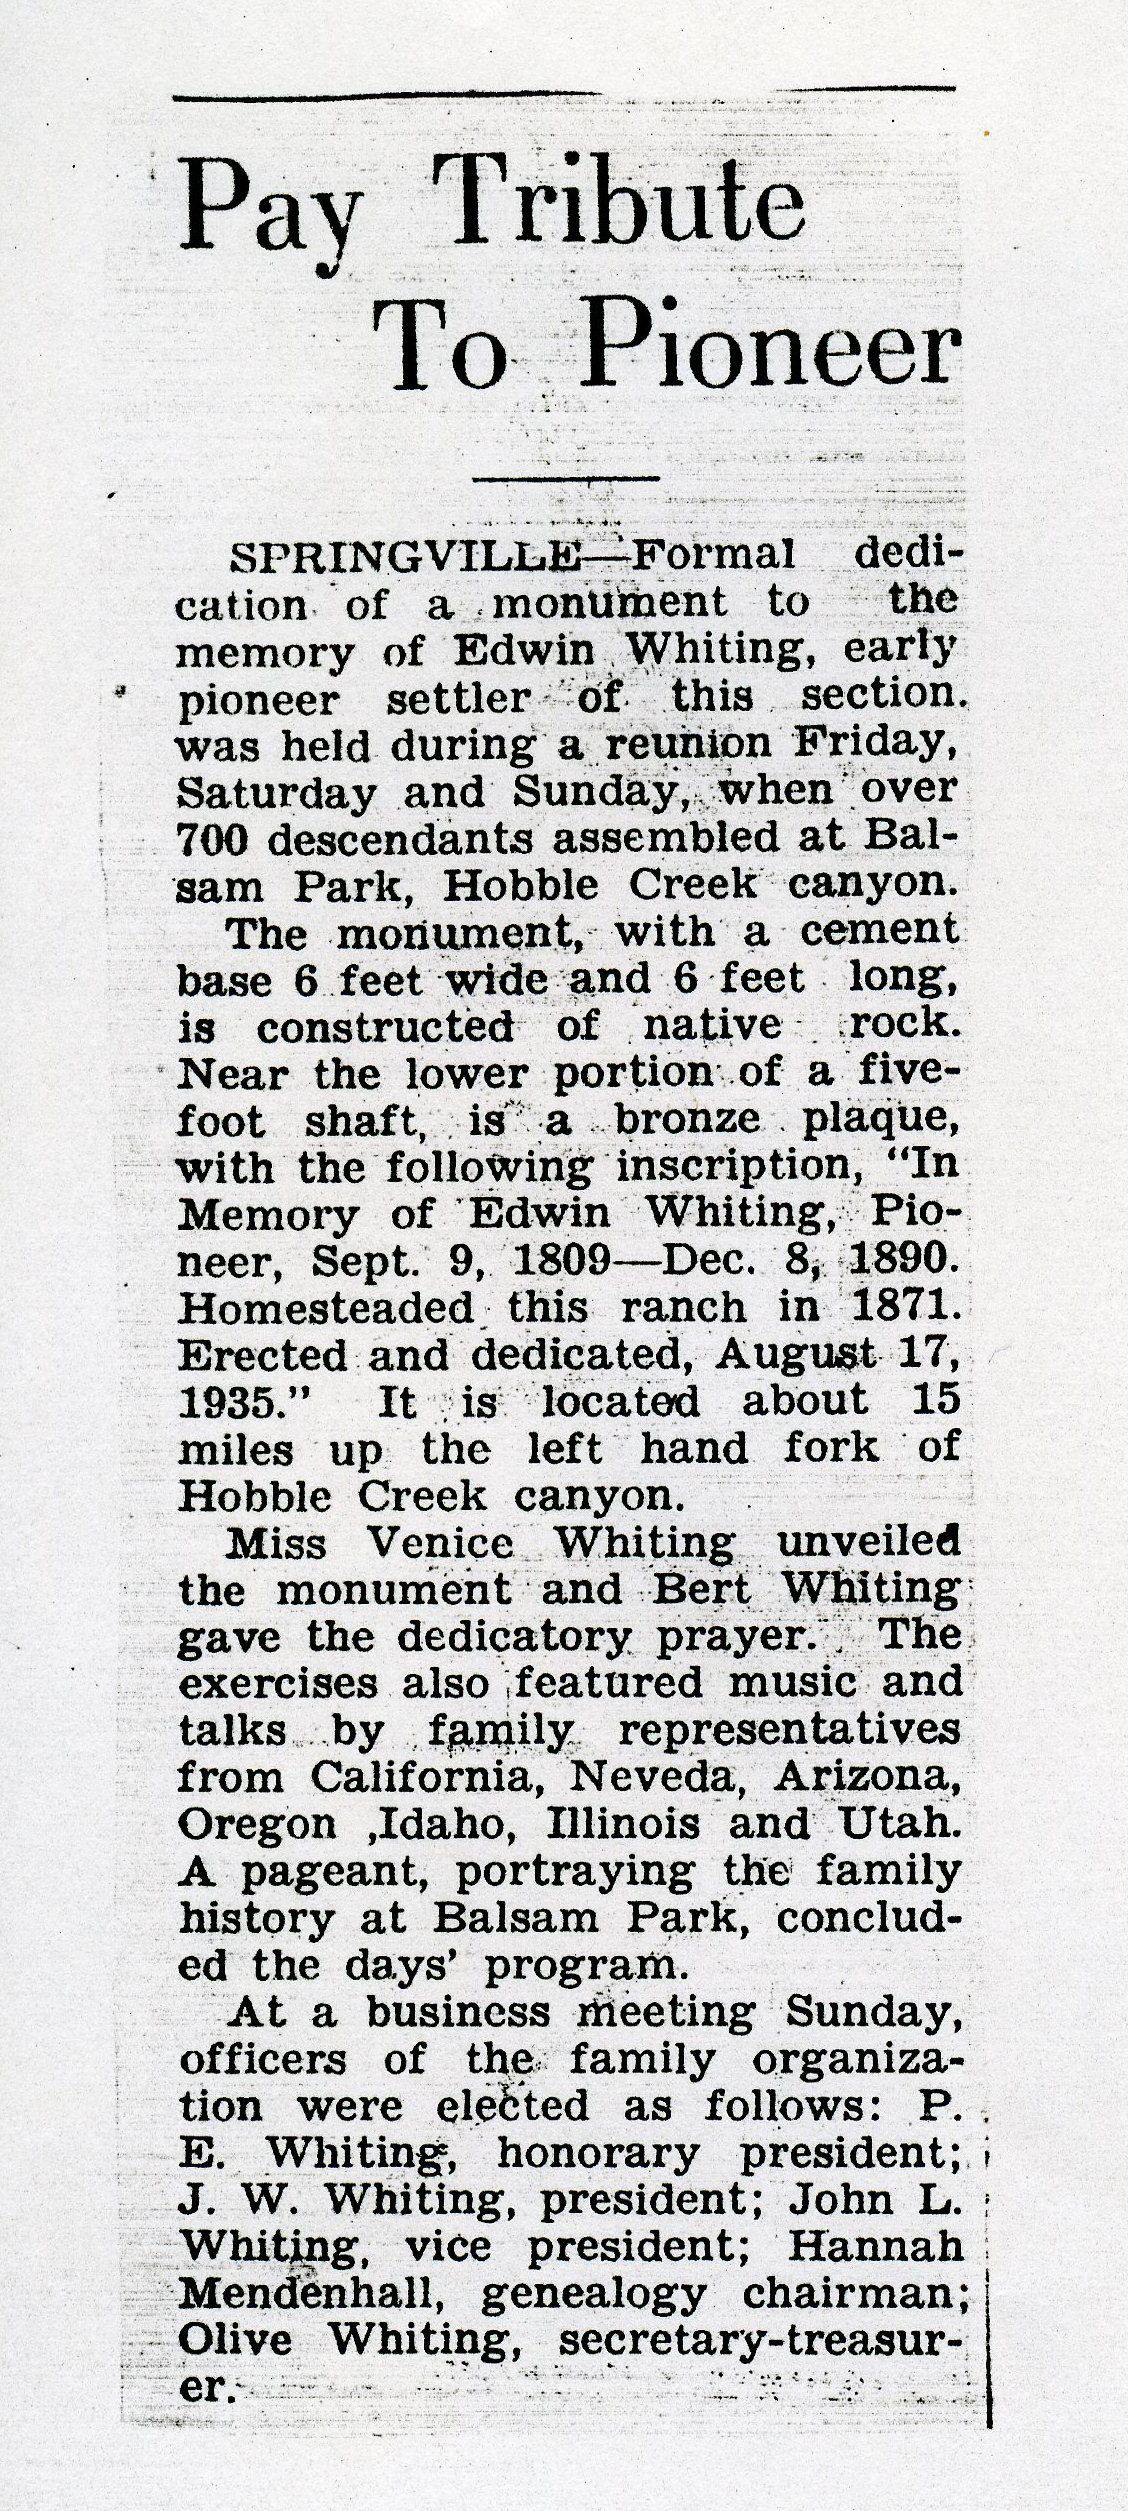 Newspaper account of the Monument Dedication